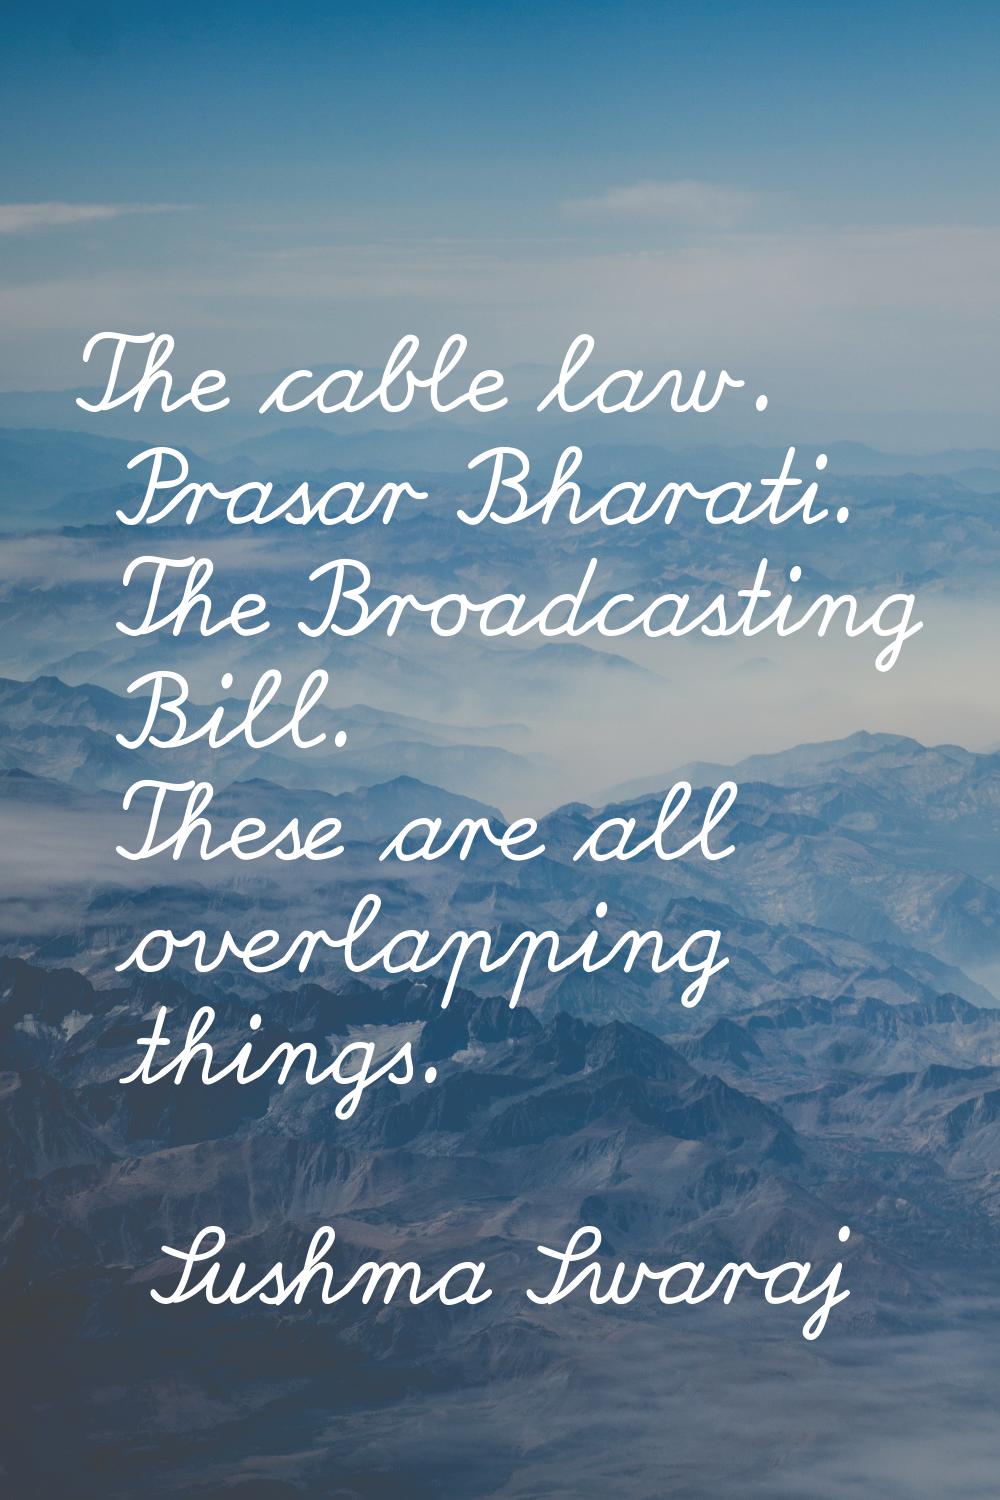 The cable law. Prasar Bharati. The Broadcasting Bill. These are all overlapping things.